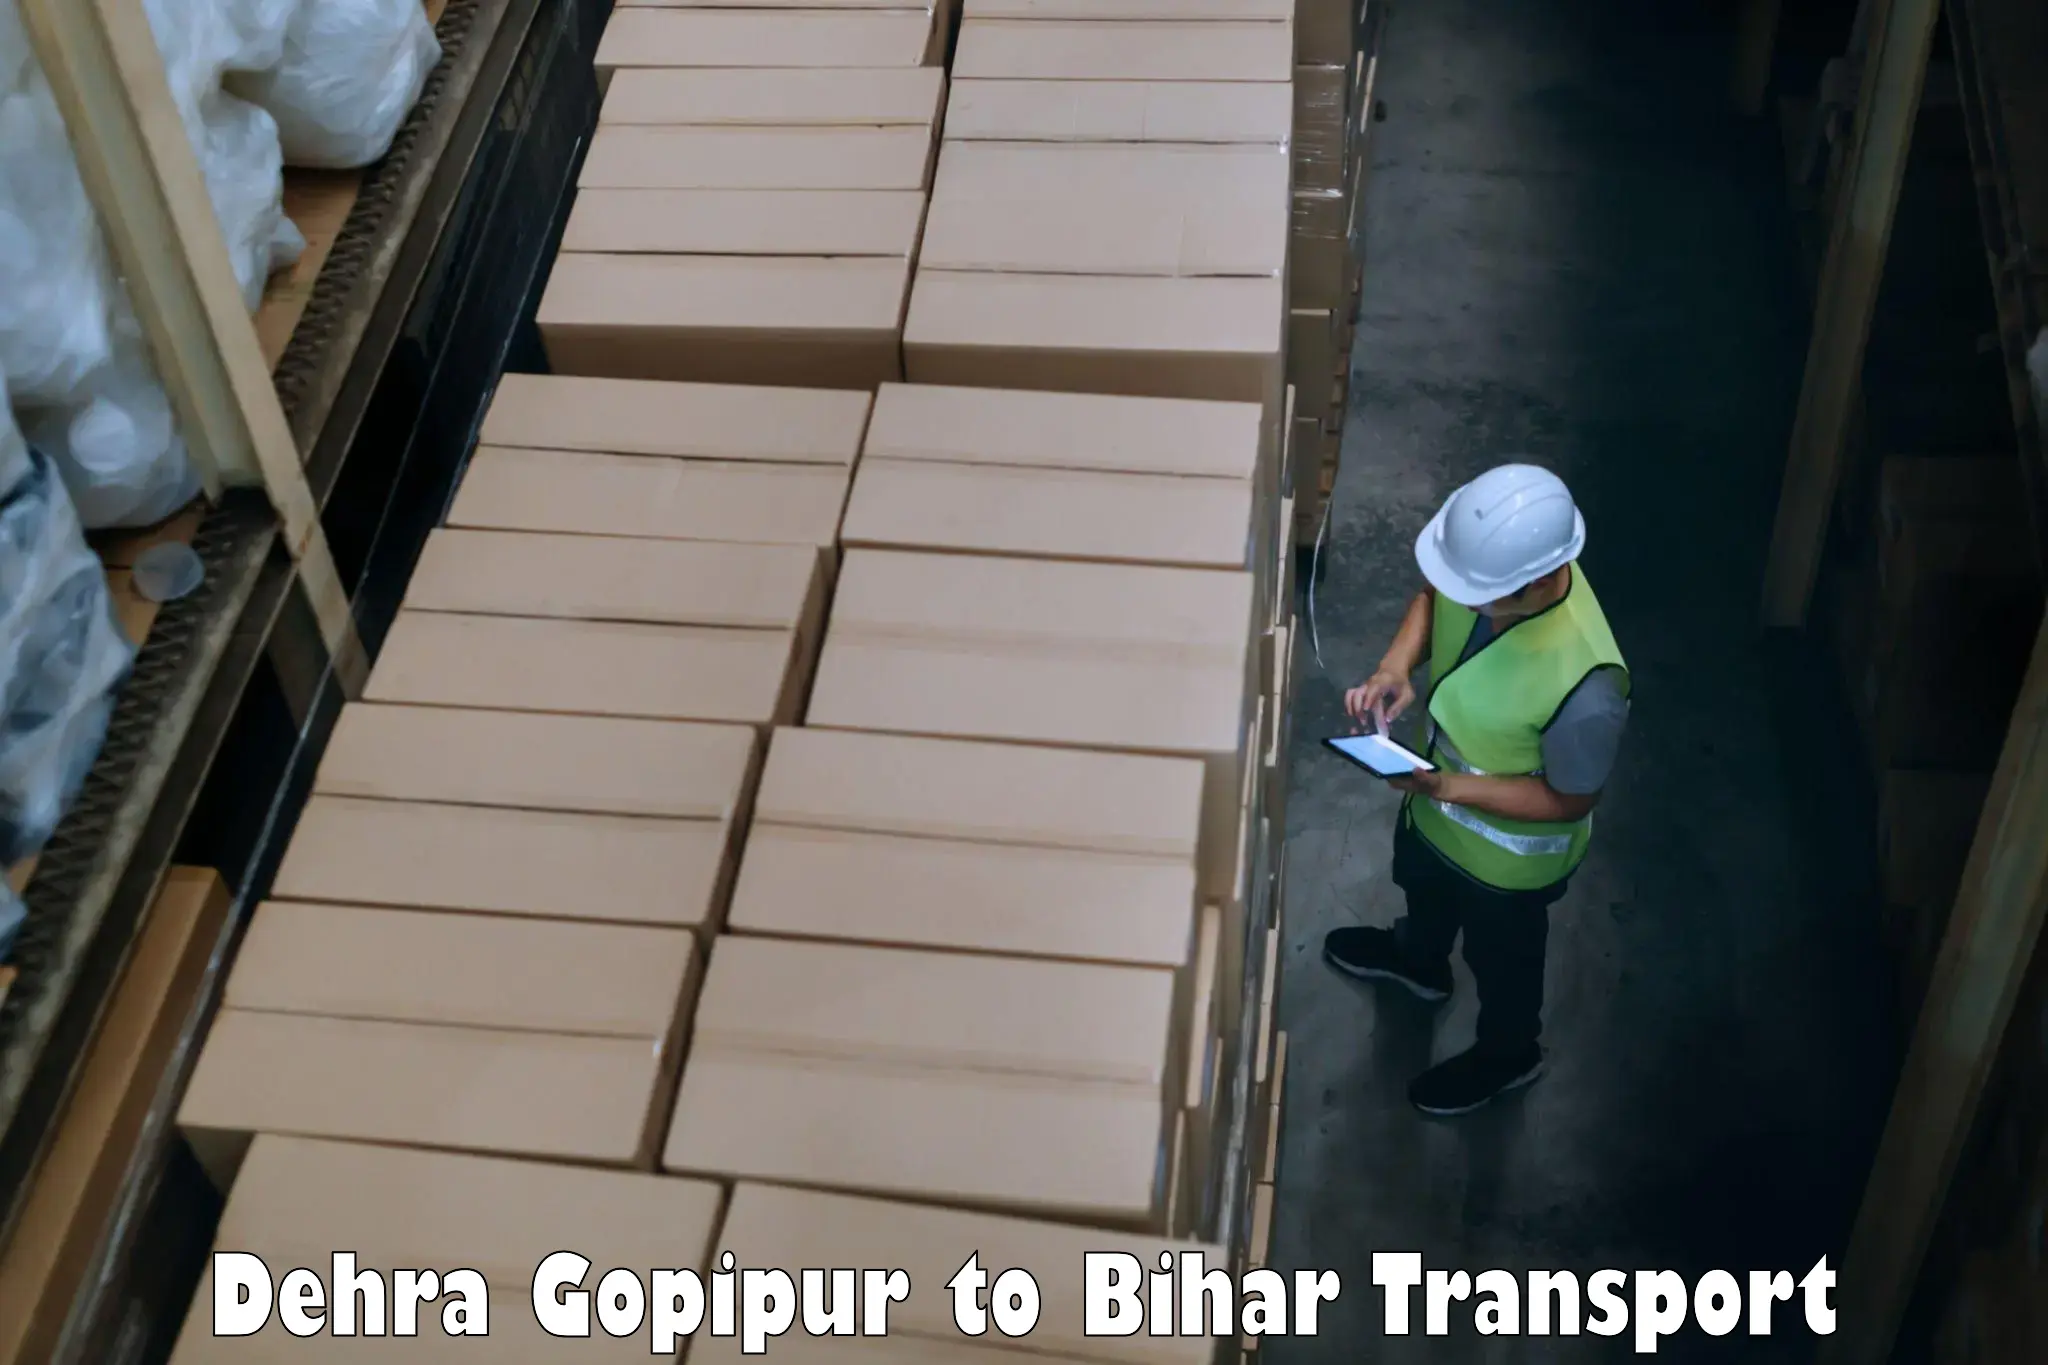 Lorry transport service Dehra Gopipur to Chainpur